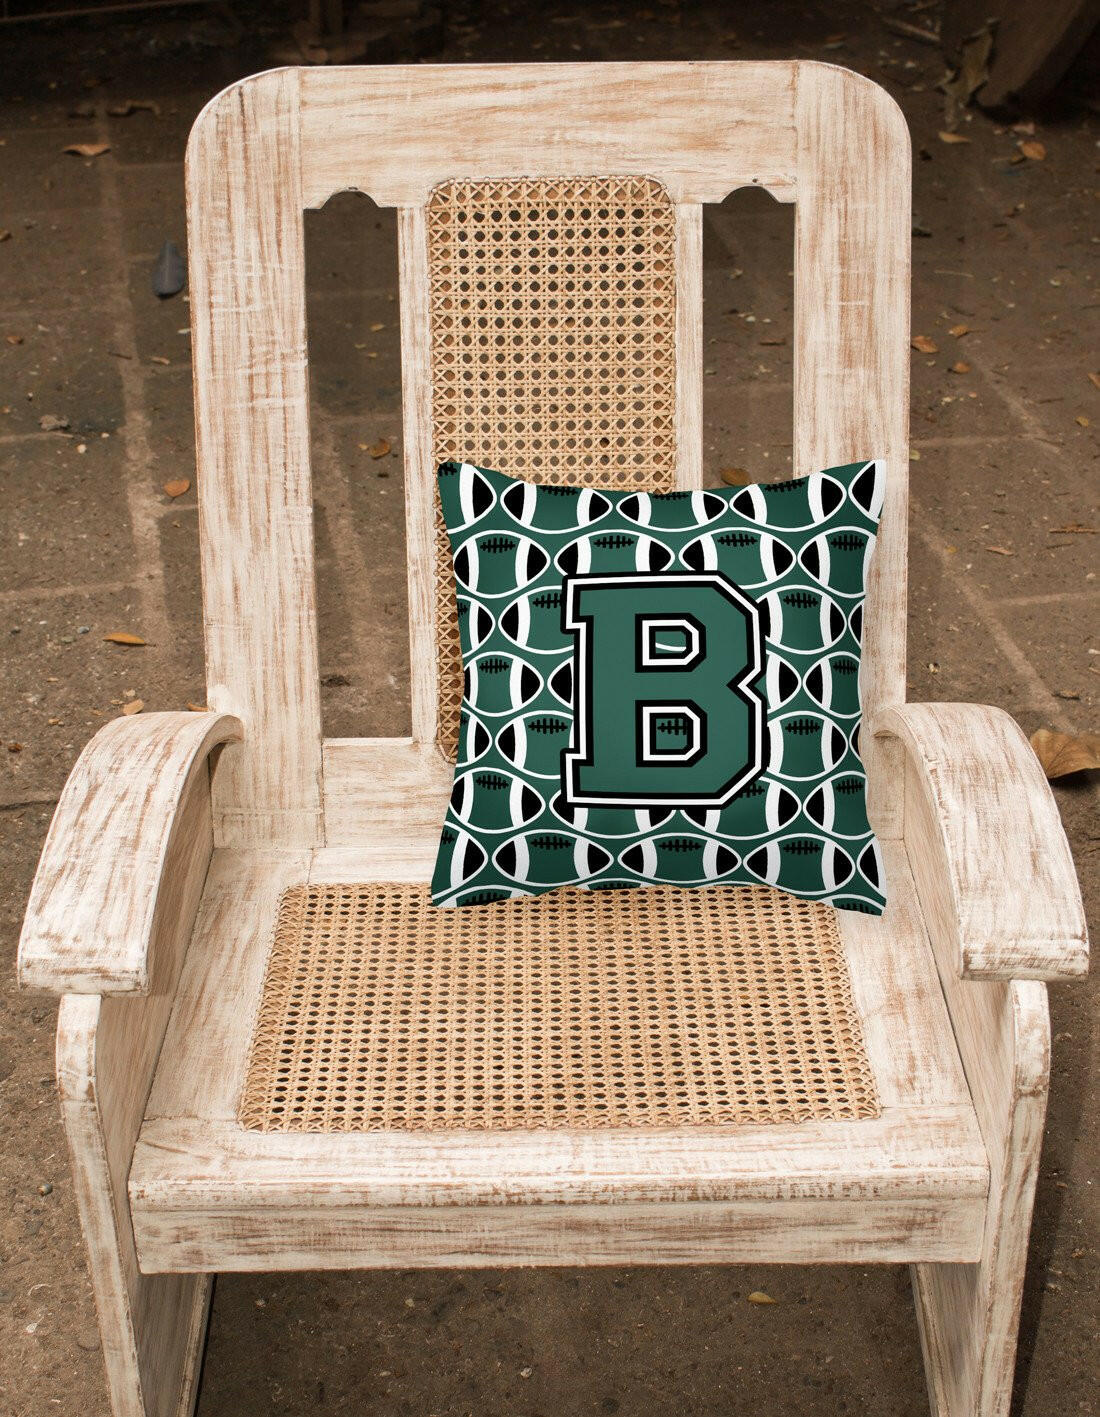 Letter B Football Green and White Fabric Decorative Pillow CJ1071-BPW1414 by Caroline's Treasures